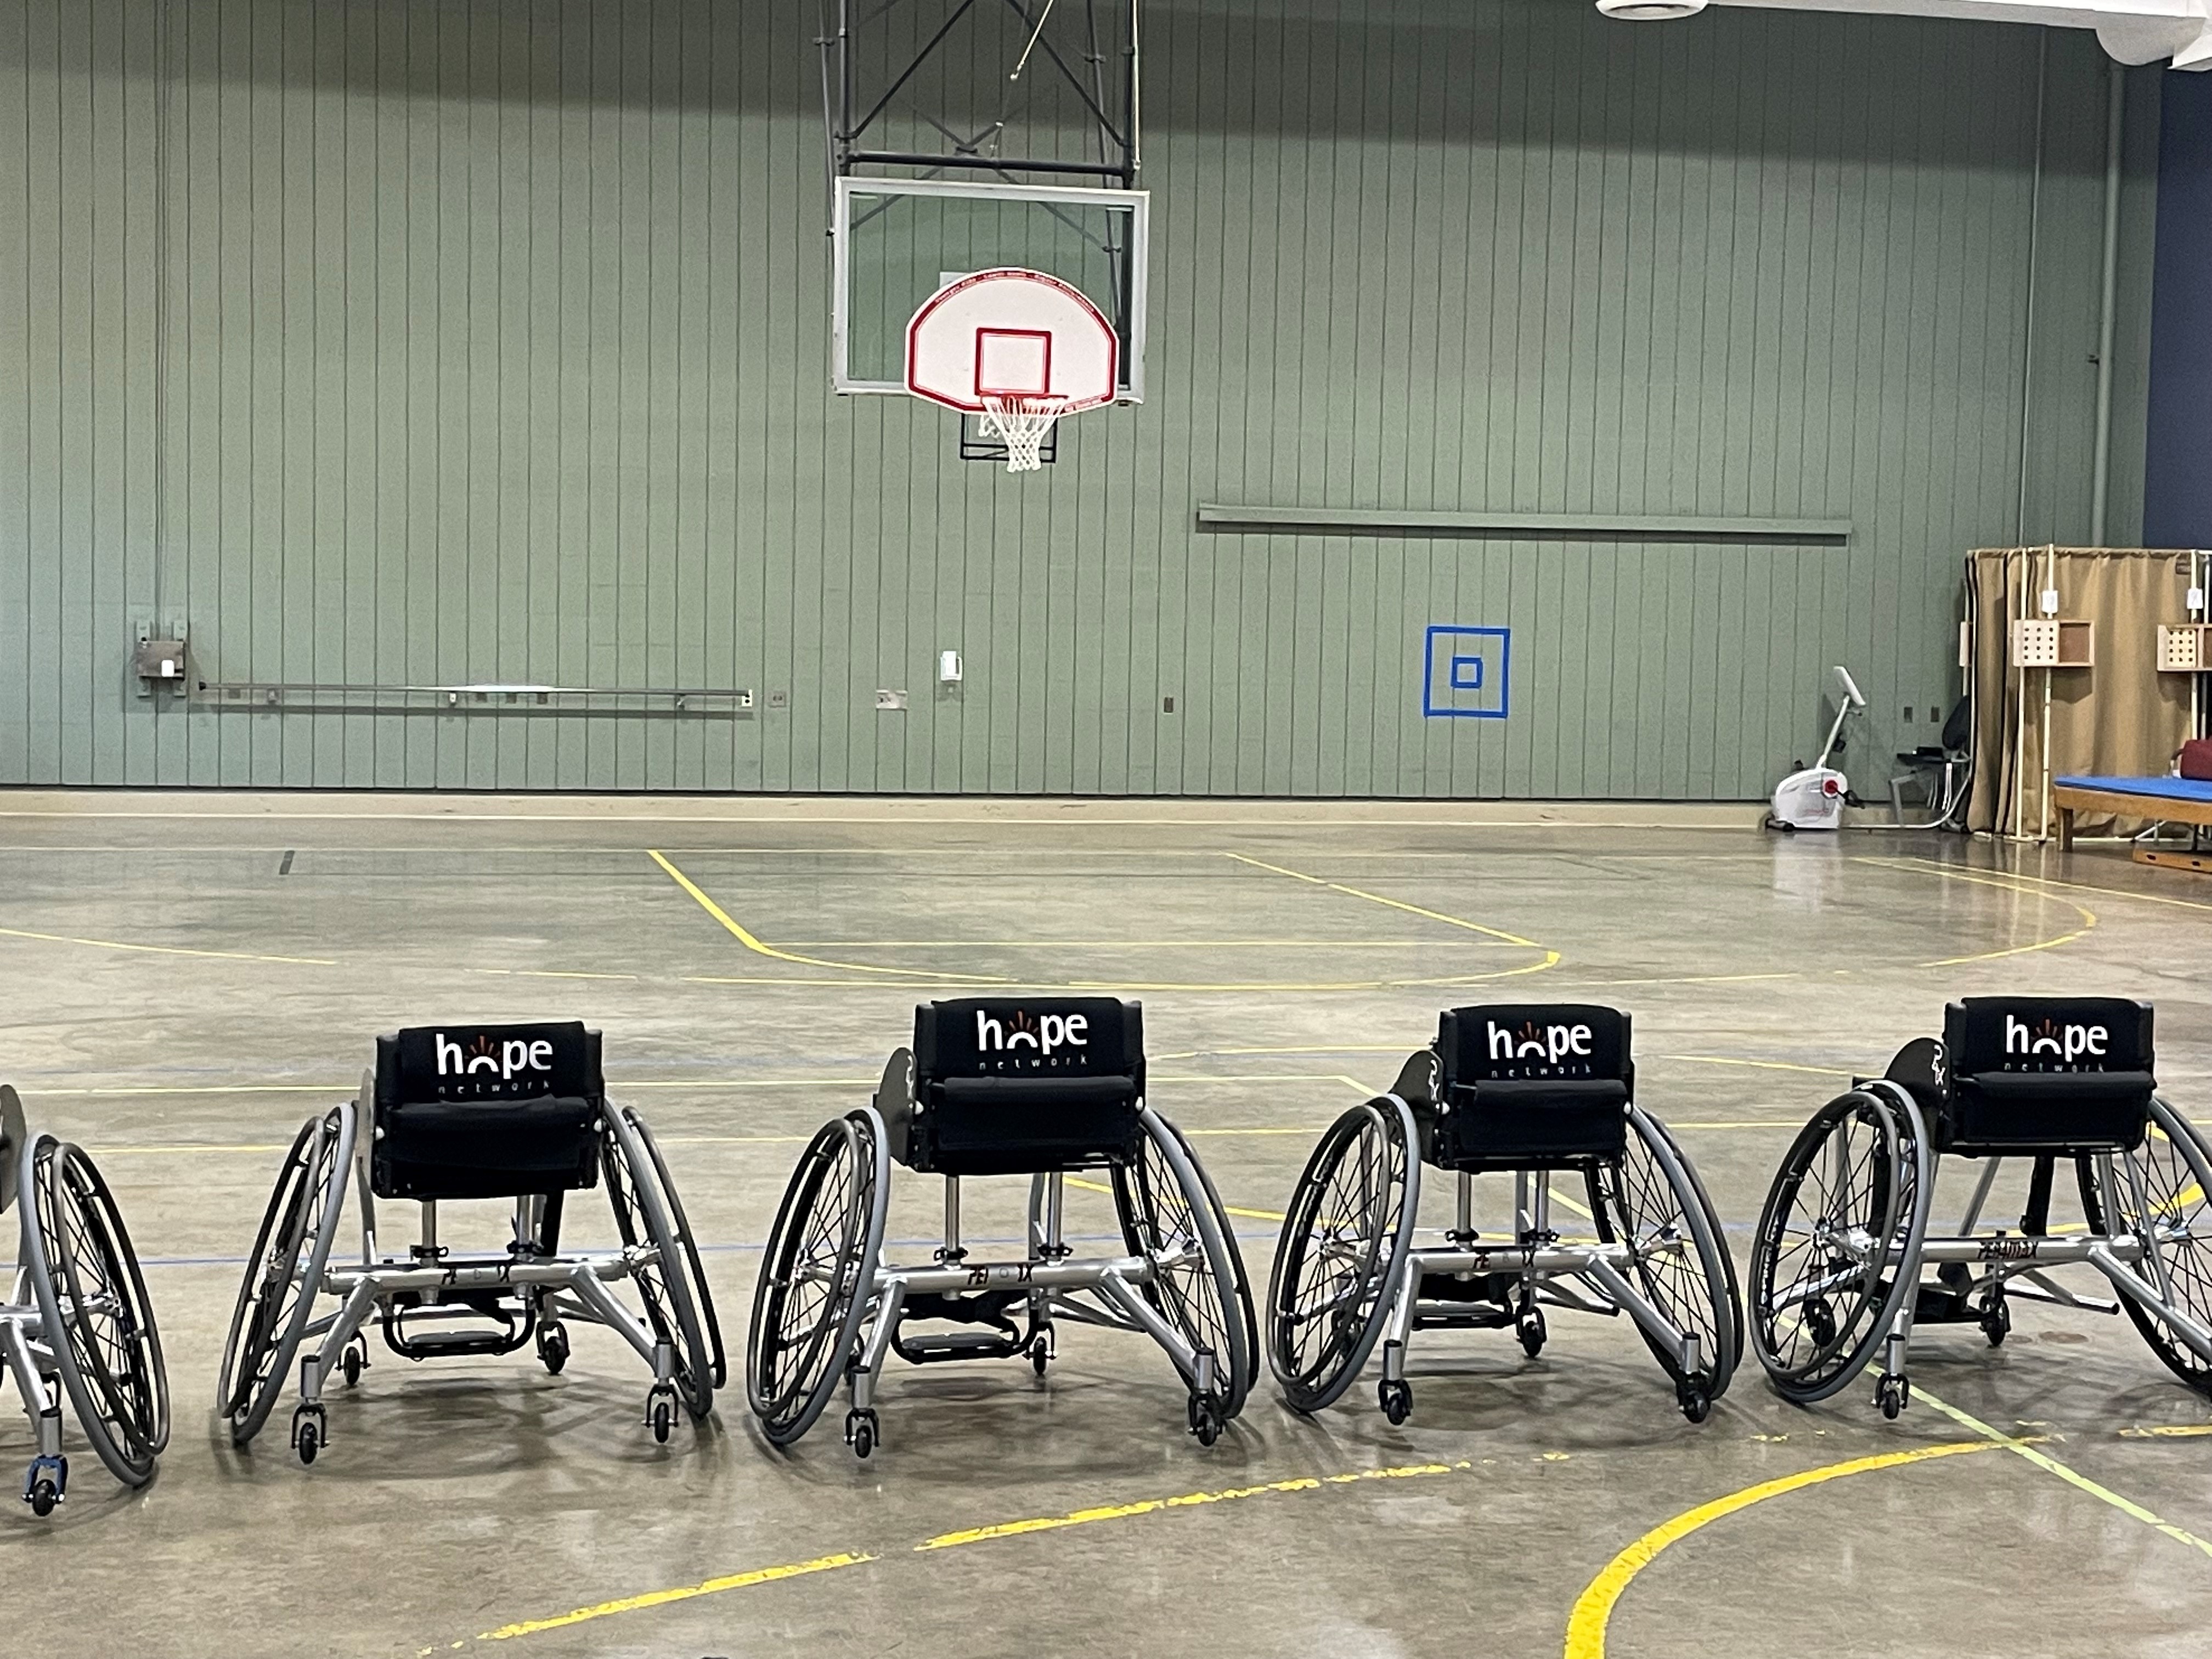 Photo of basketball wheelchairs on the court